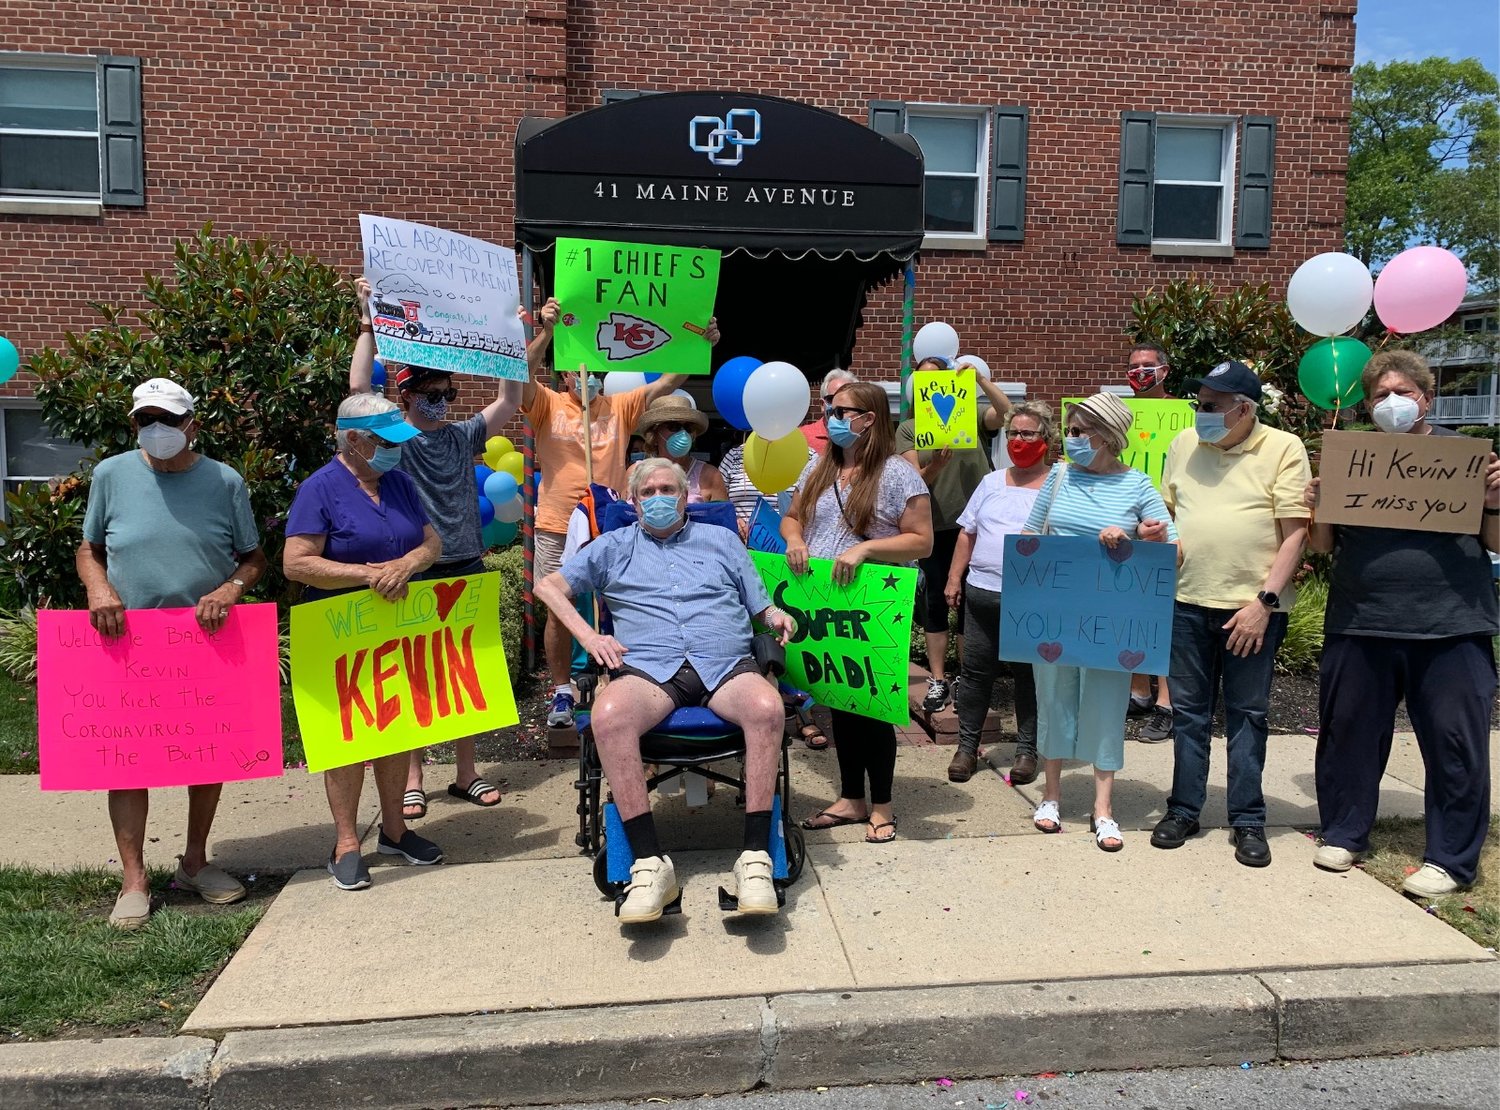 A celebration was held at The Grand Pavilion on June 24 in honor of the 60th patient to recover from Covid-19. Kevin McCay, center, was the 60th patient to recover from the disease.